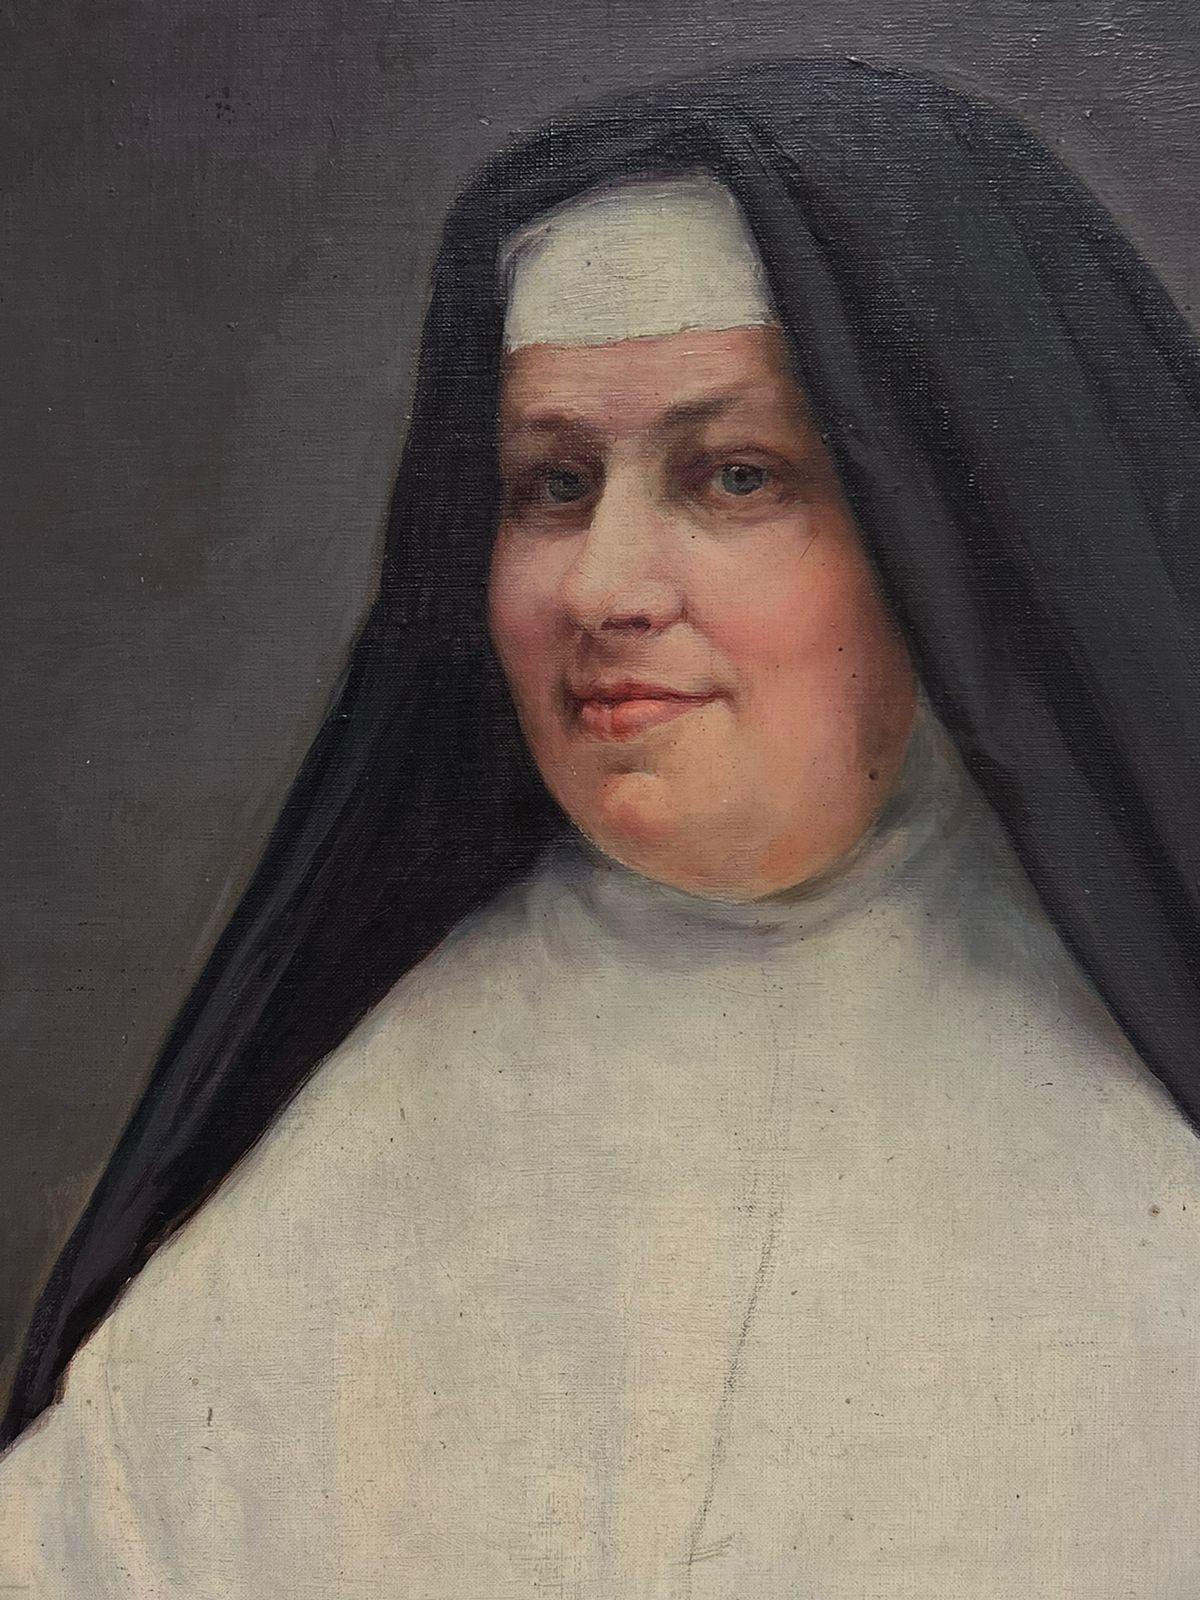 Portrait of a Nun
French School, 19th century
oil on canvas, simple wooden slip frame
framed: 27.5 x 20 inches
canvas: 27 x 19.75 inches
provenance: private collection, Champagne region of France
condition: good and sound condition, a few indents